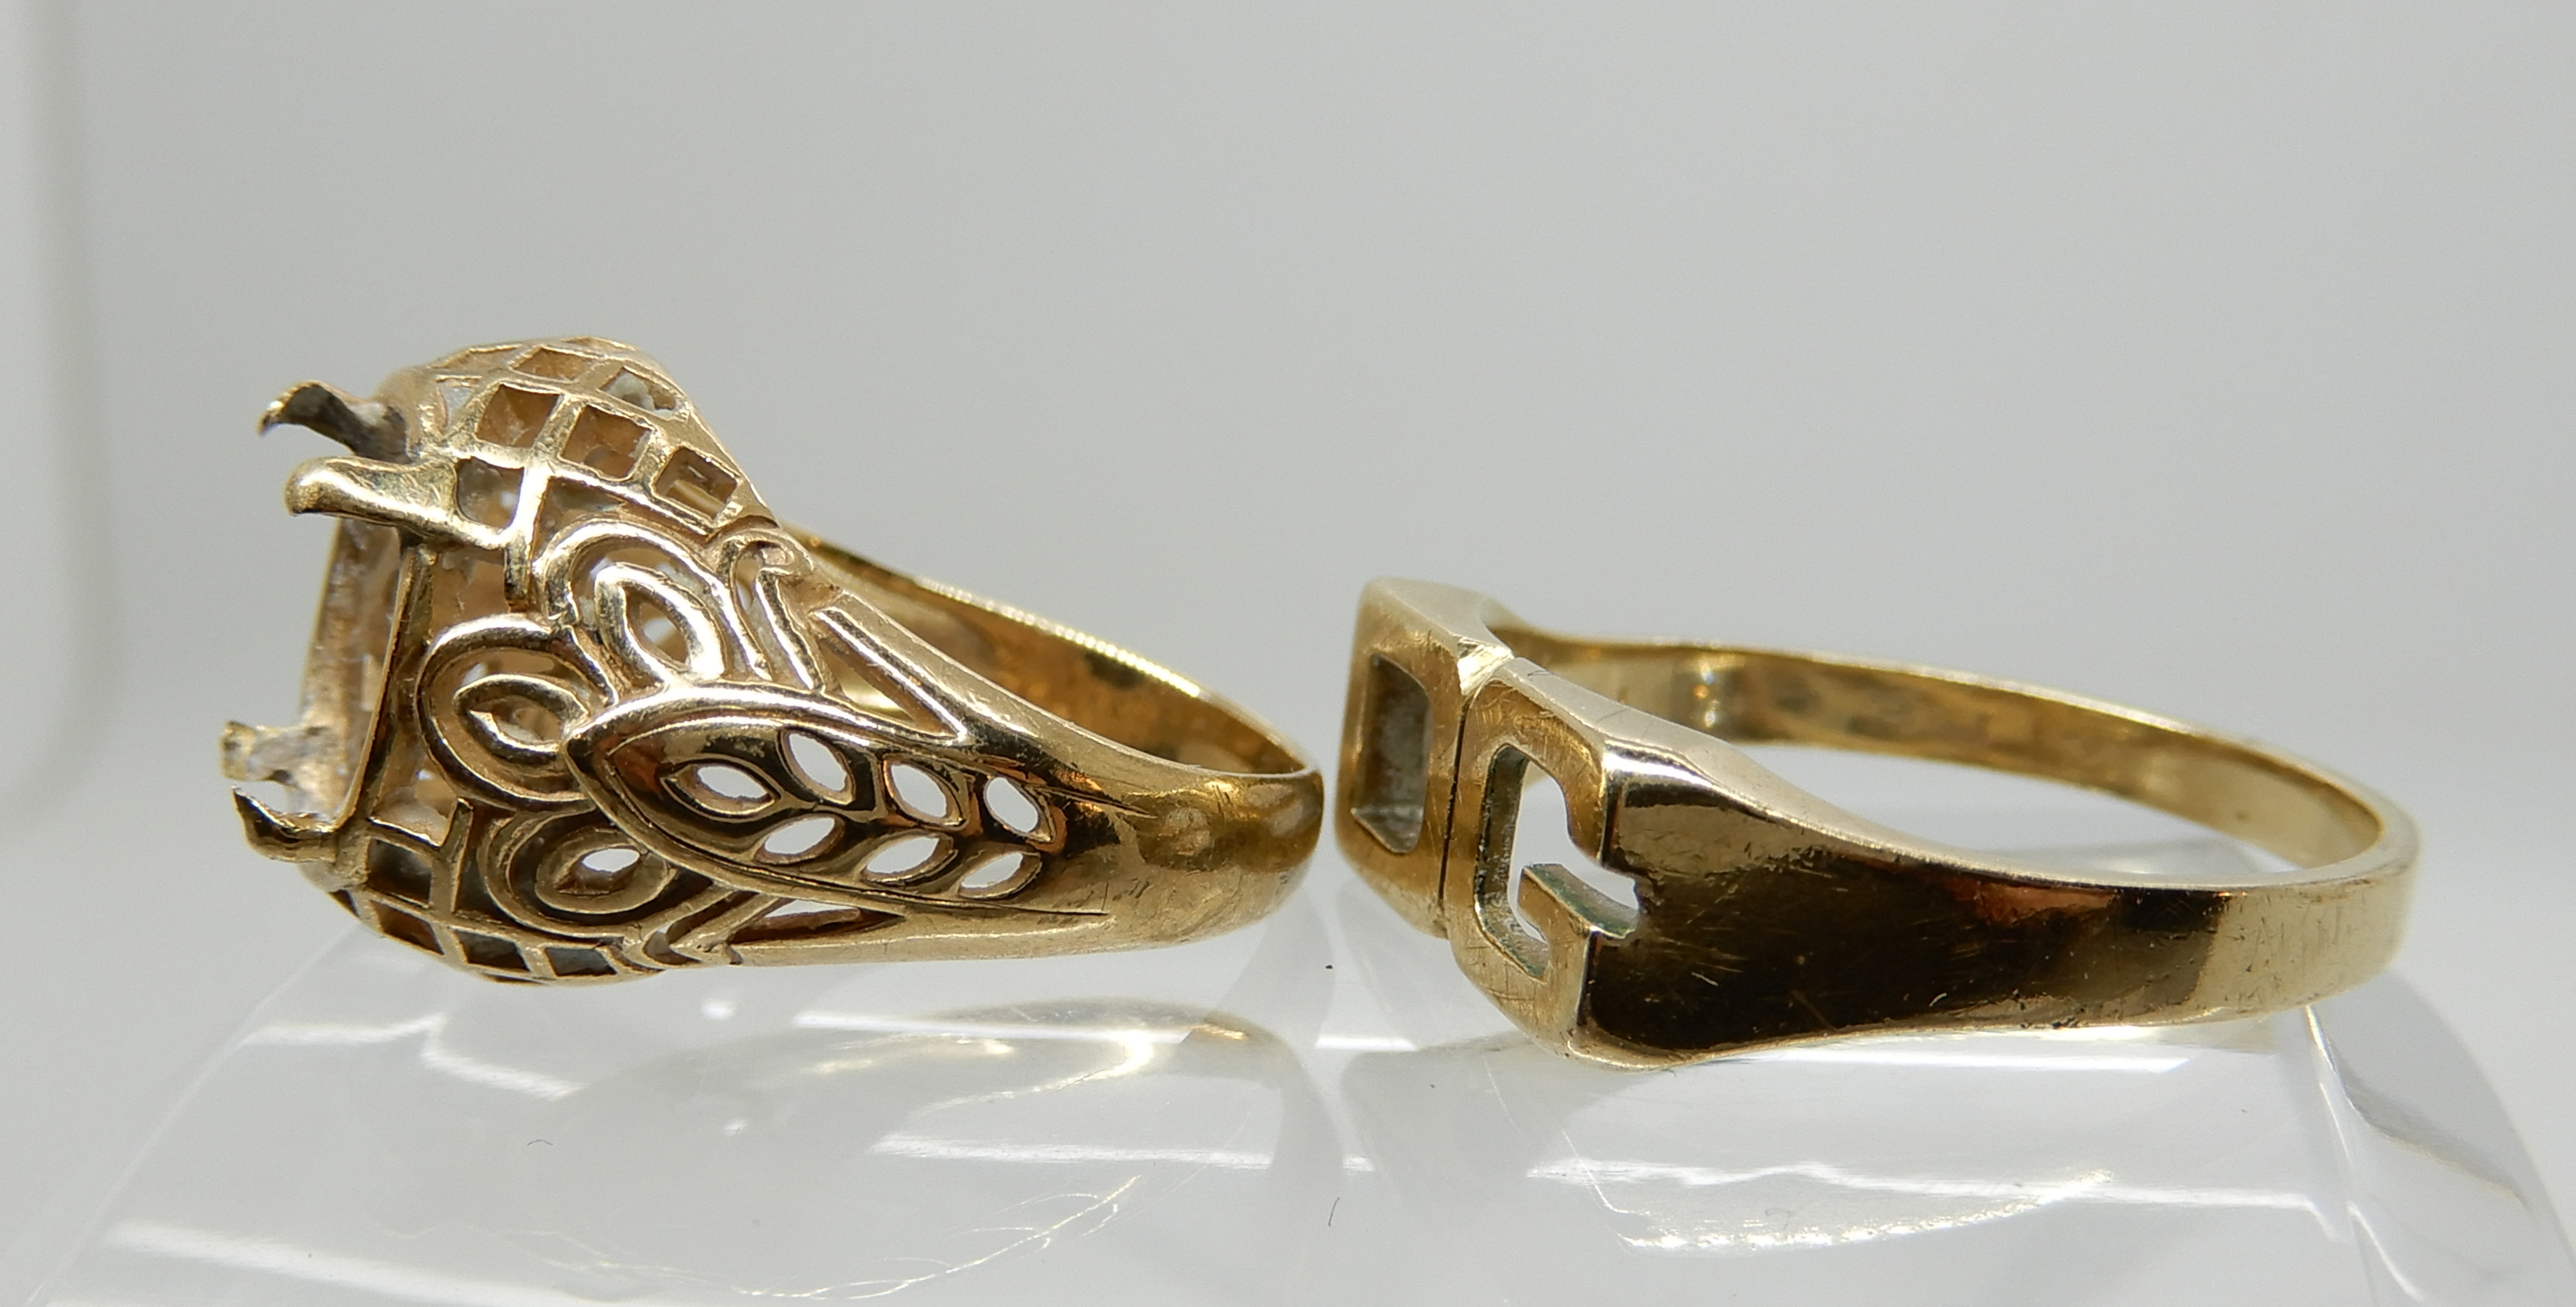 A 9ct initial ring 'DG' size Q1/2 and a decorative yellow metal ring shank without stone size K1/ - Image 2 of 3